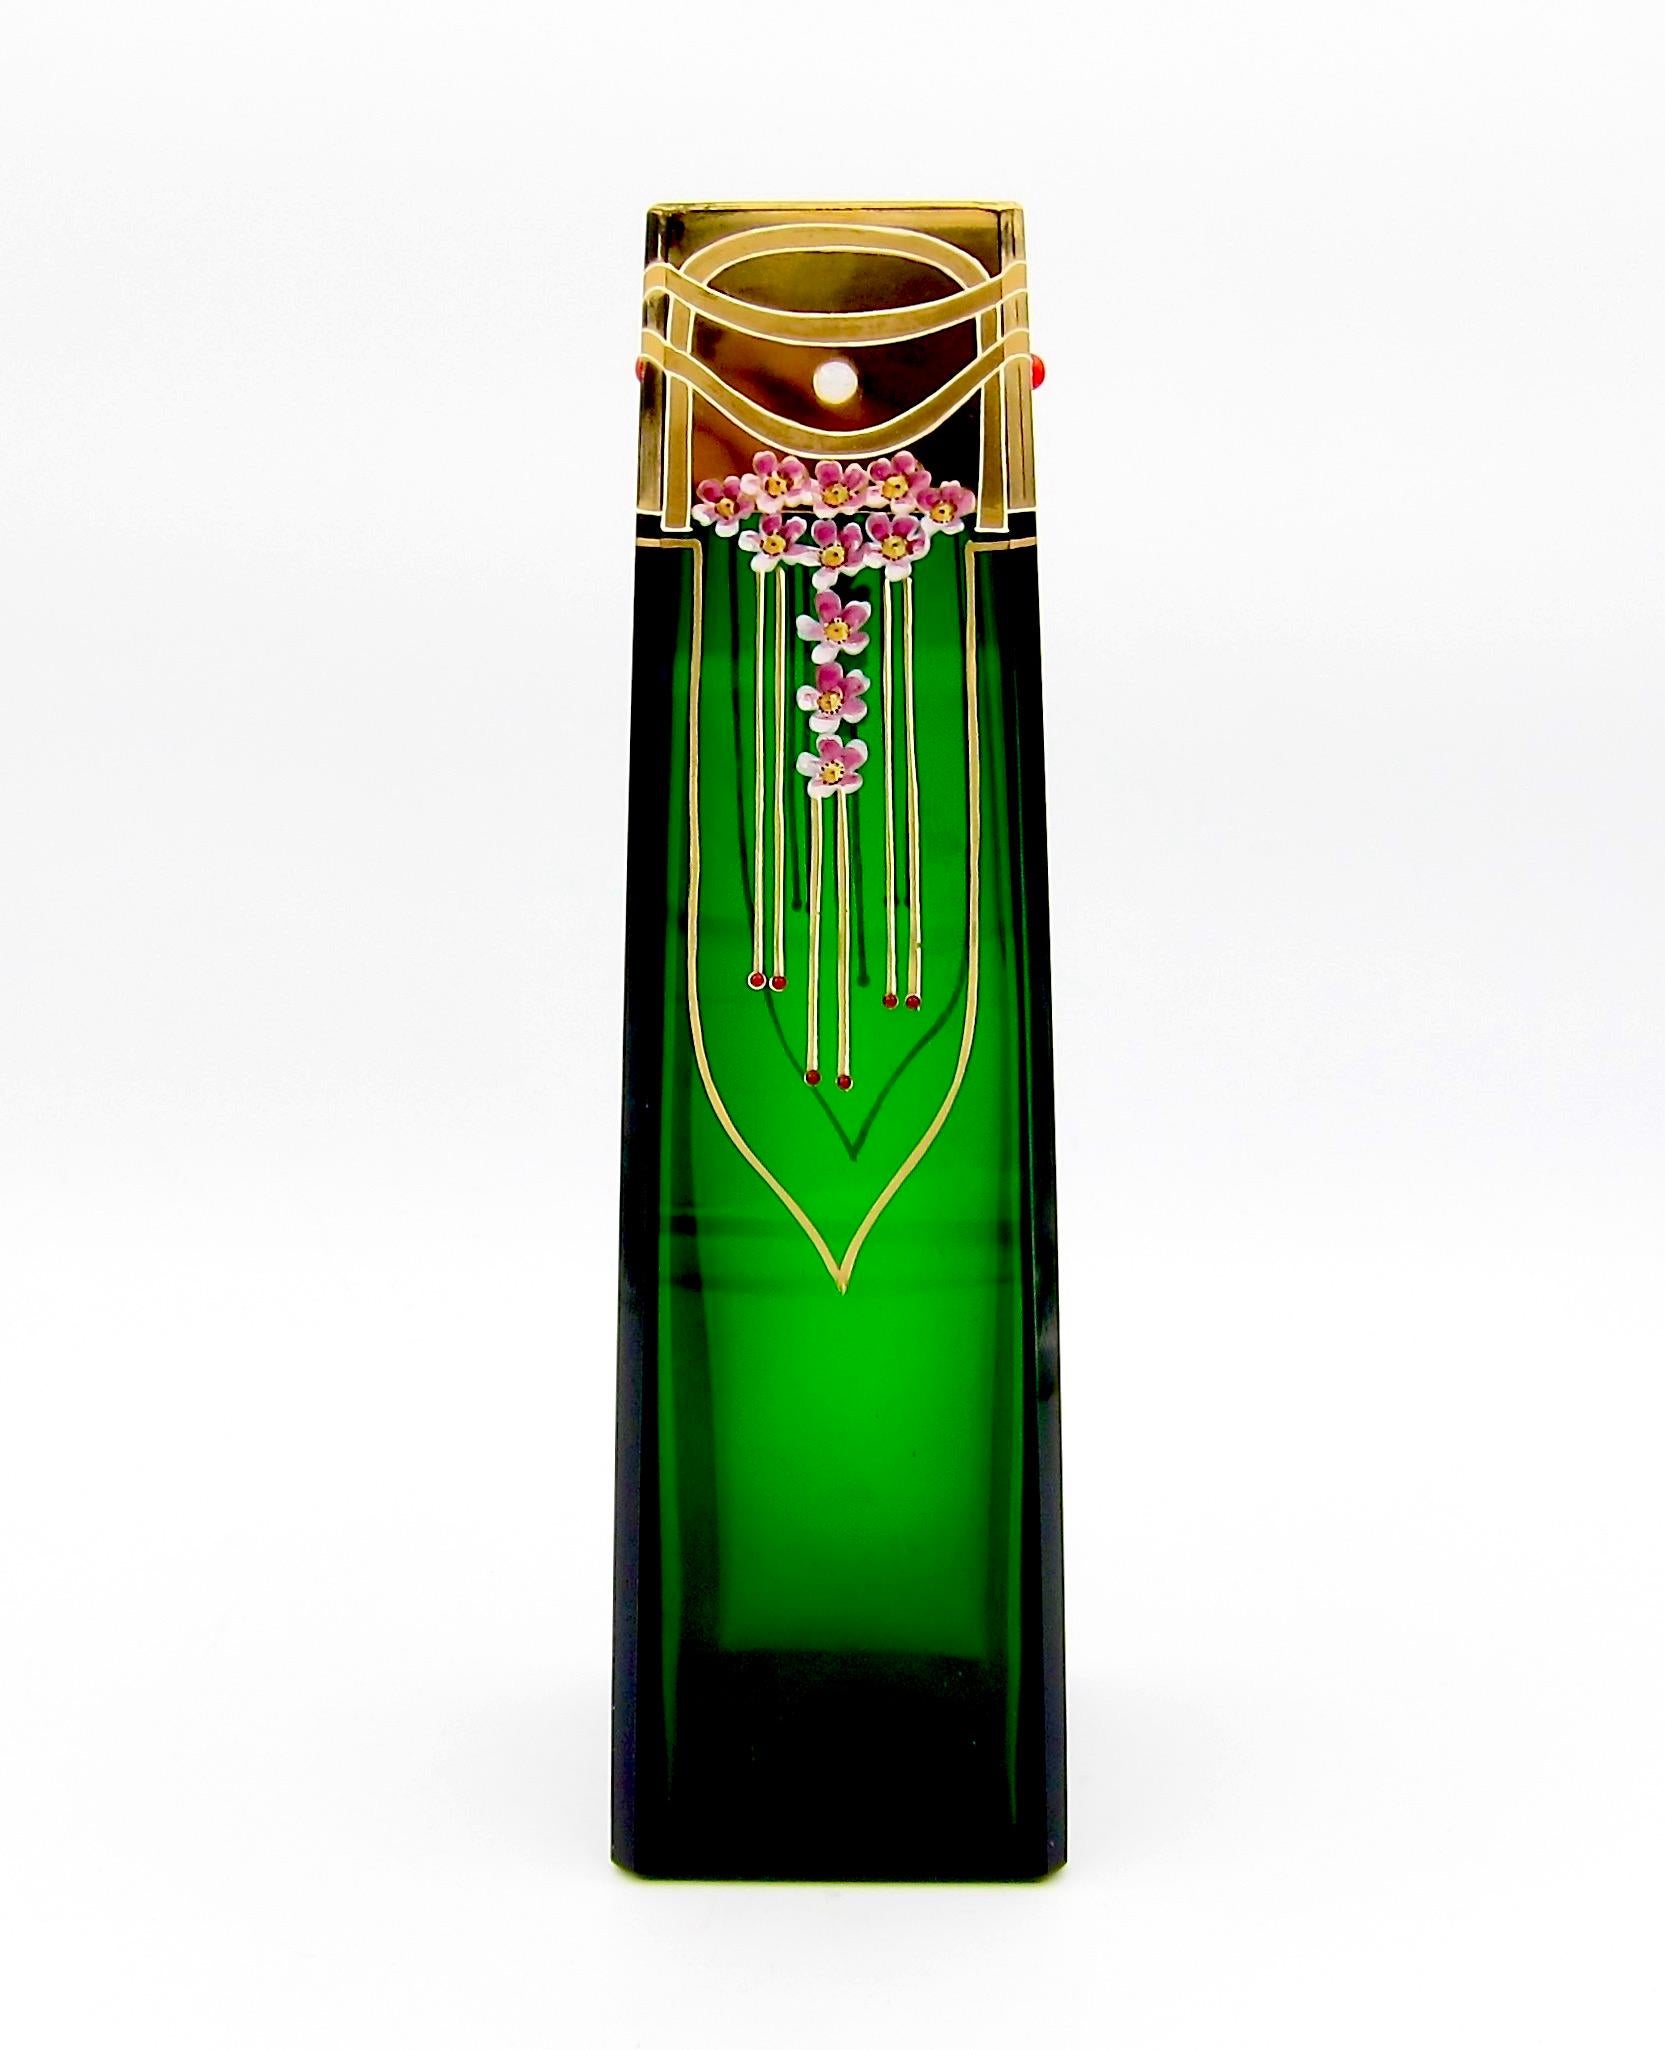 A rectangular antique art glass vase with beveled edges from the Josef Riedel Glassworks at Polaun, dating circa 1900-1910. The dark green glass vessel was mould-blown and decorated in polished gold work ornament with raised, ivory-colored enamel